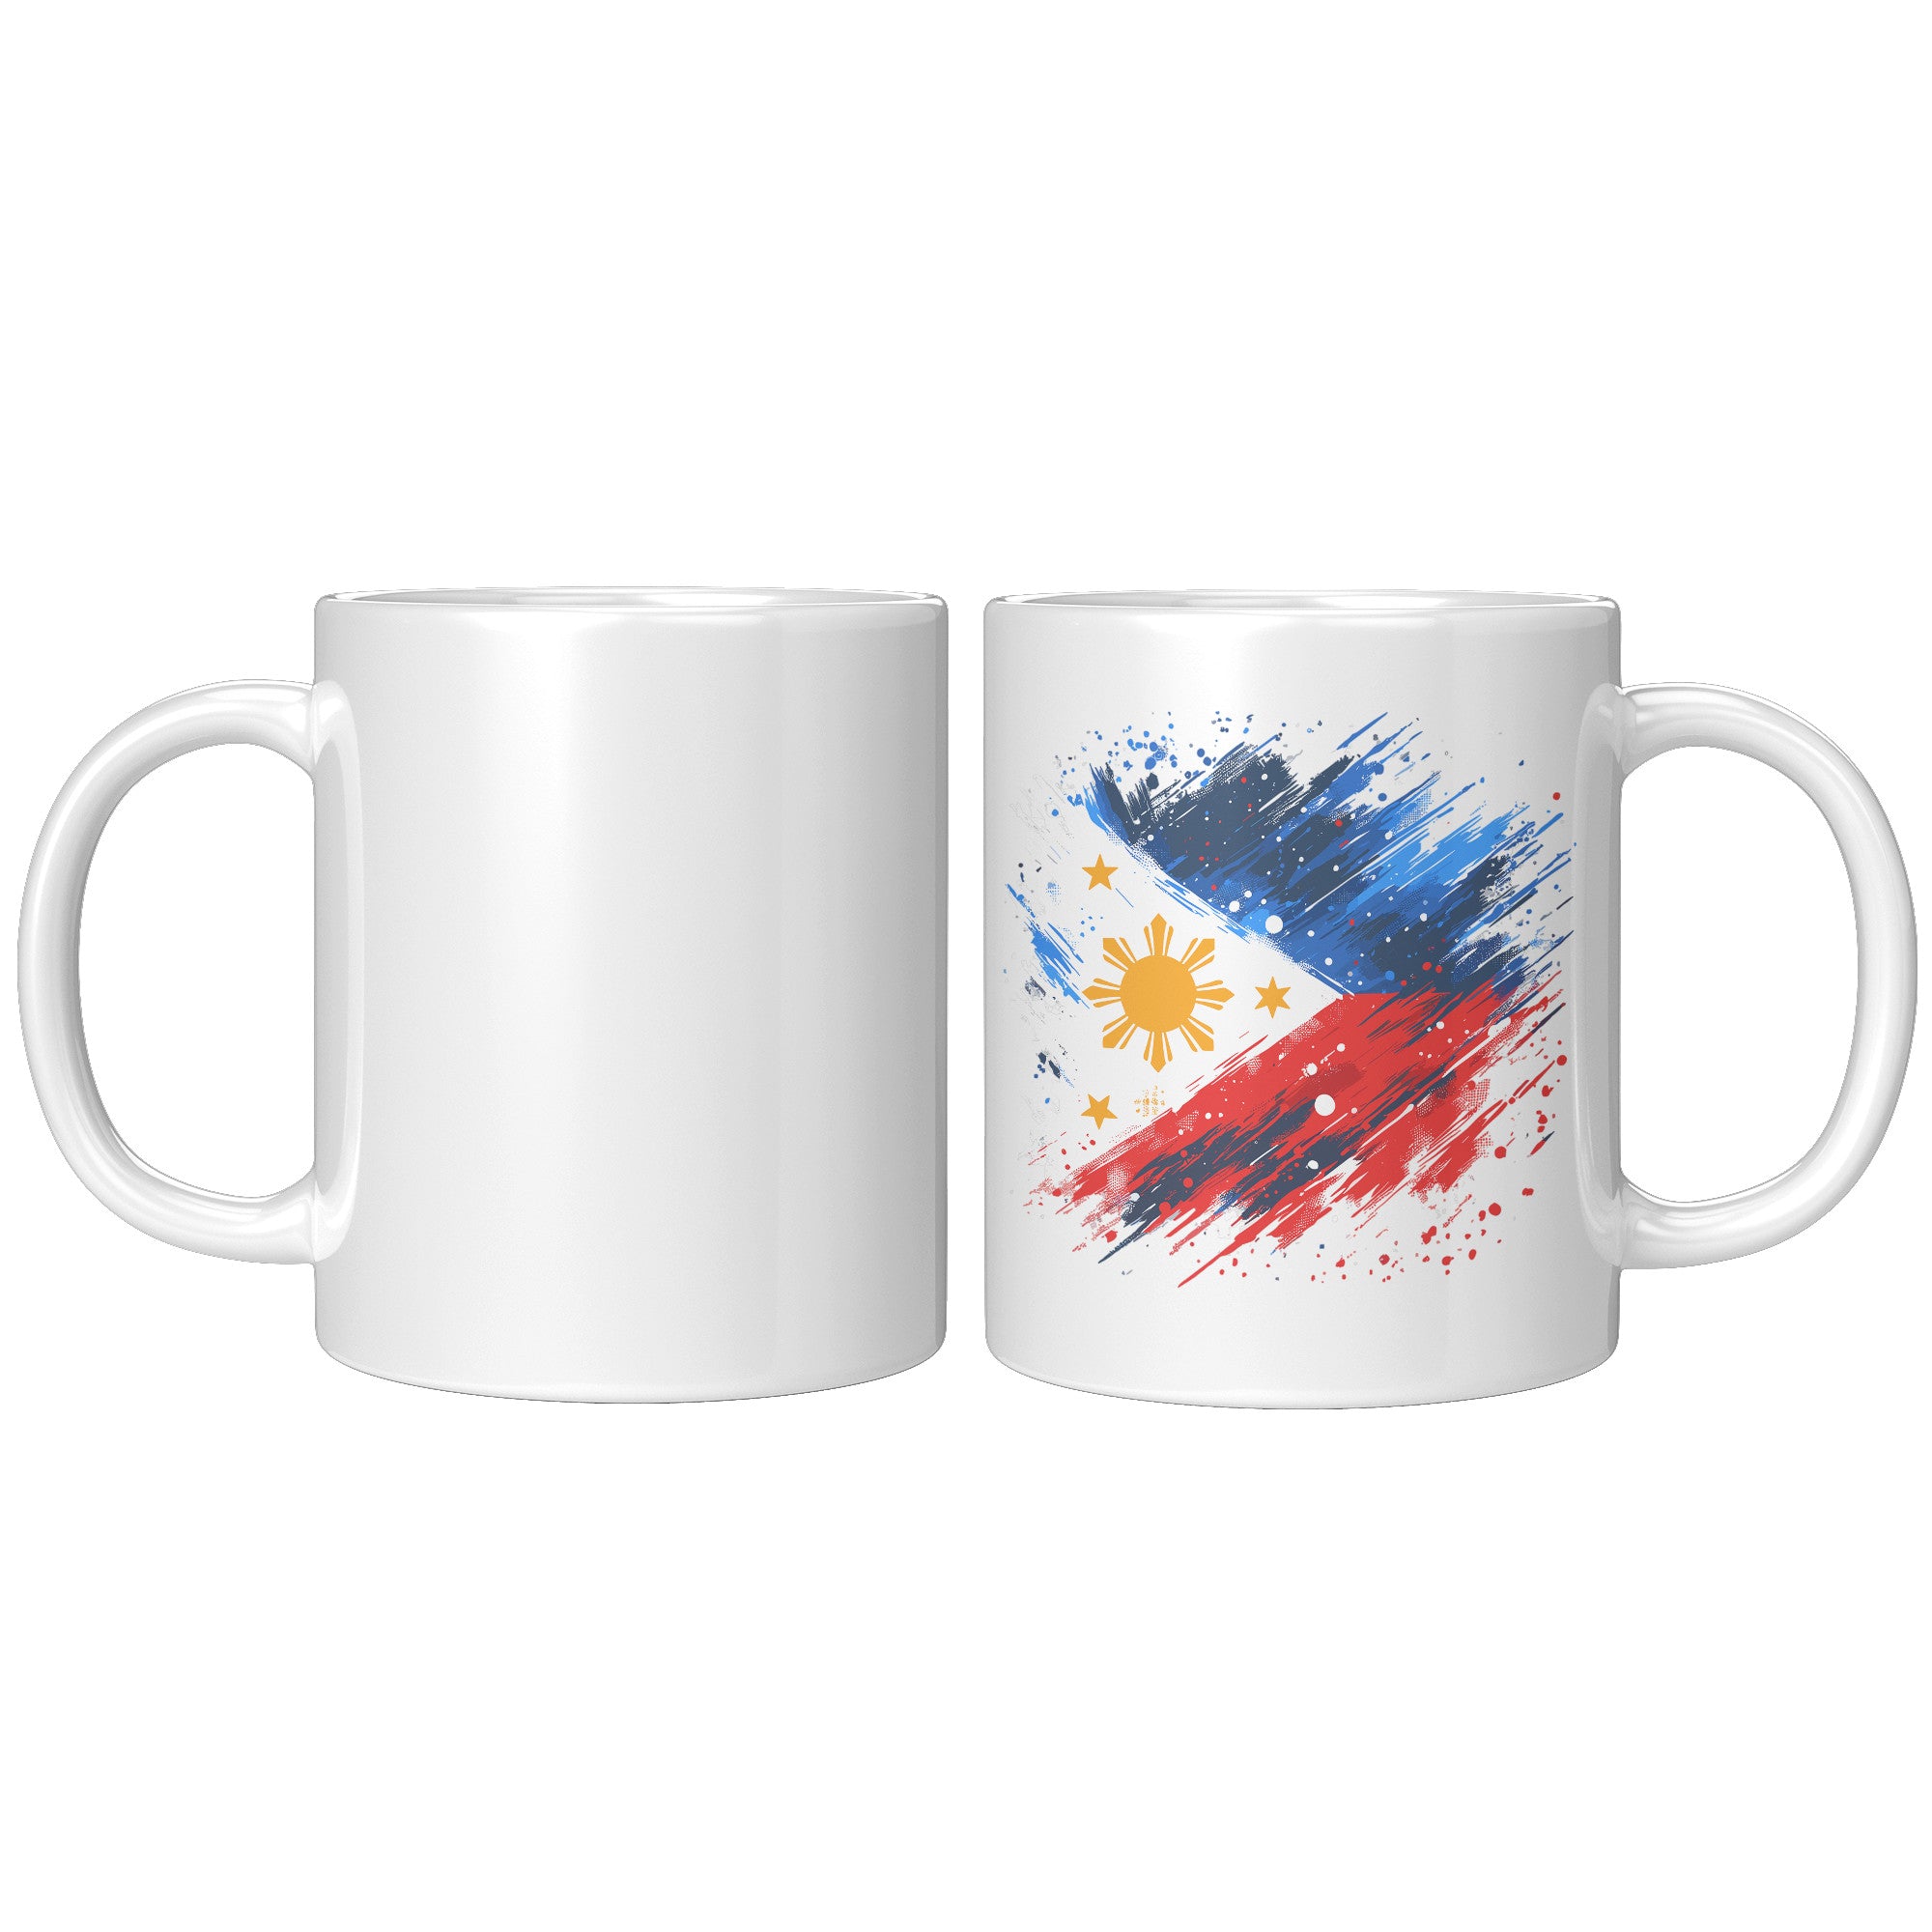 Proudly Pinoy Coffee Mug - Vibrant Filipino Flag Design - Patriotic Gift for Filipinos - Celebrate Heritage with Every Sip!" - H